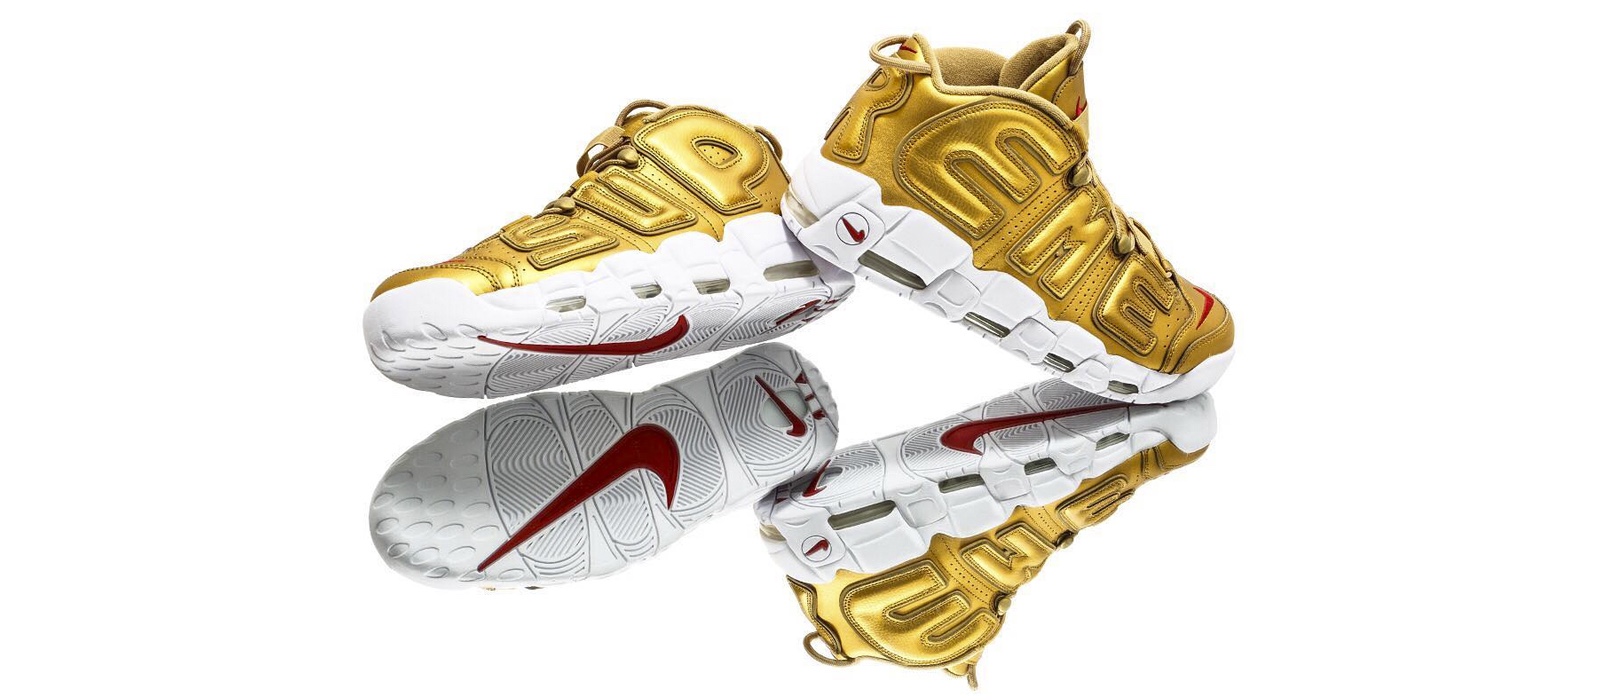 Best Look Yet at the Supreme x Nike Air More Uptempo Gold